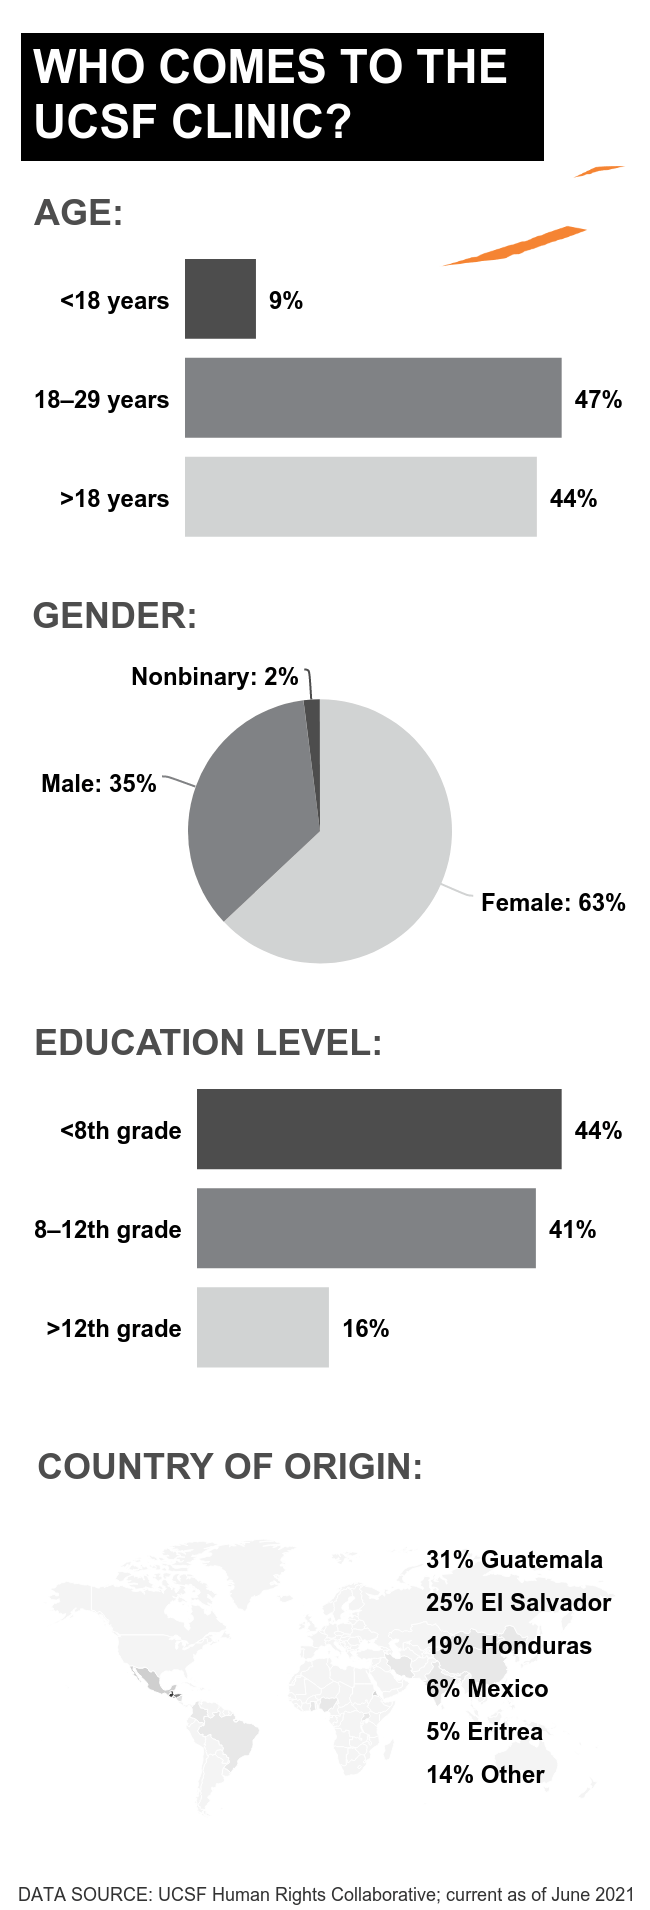 Who comes to the clinic? Age: 9% <18 years, 47% 18–29 years, 44% >29 years; Gender: 35% Male, 63% Female, 2% Nonbinary; Education Level: 44% <8th grade, 41% 8-12th grade, 16% >12th grade; Country of origin: 31% Guatemala, 25% El Salvador, 19% Honduras, 6% Mexico, 5% Eritrea, 14% Other countries: Brazil, China, Colombia, Ghana, India, Iran, Mongolia, Nicaragua, Nigeria, Uganda. Data Source: UCSF Human Rights Collaborative; current as of June 2021.